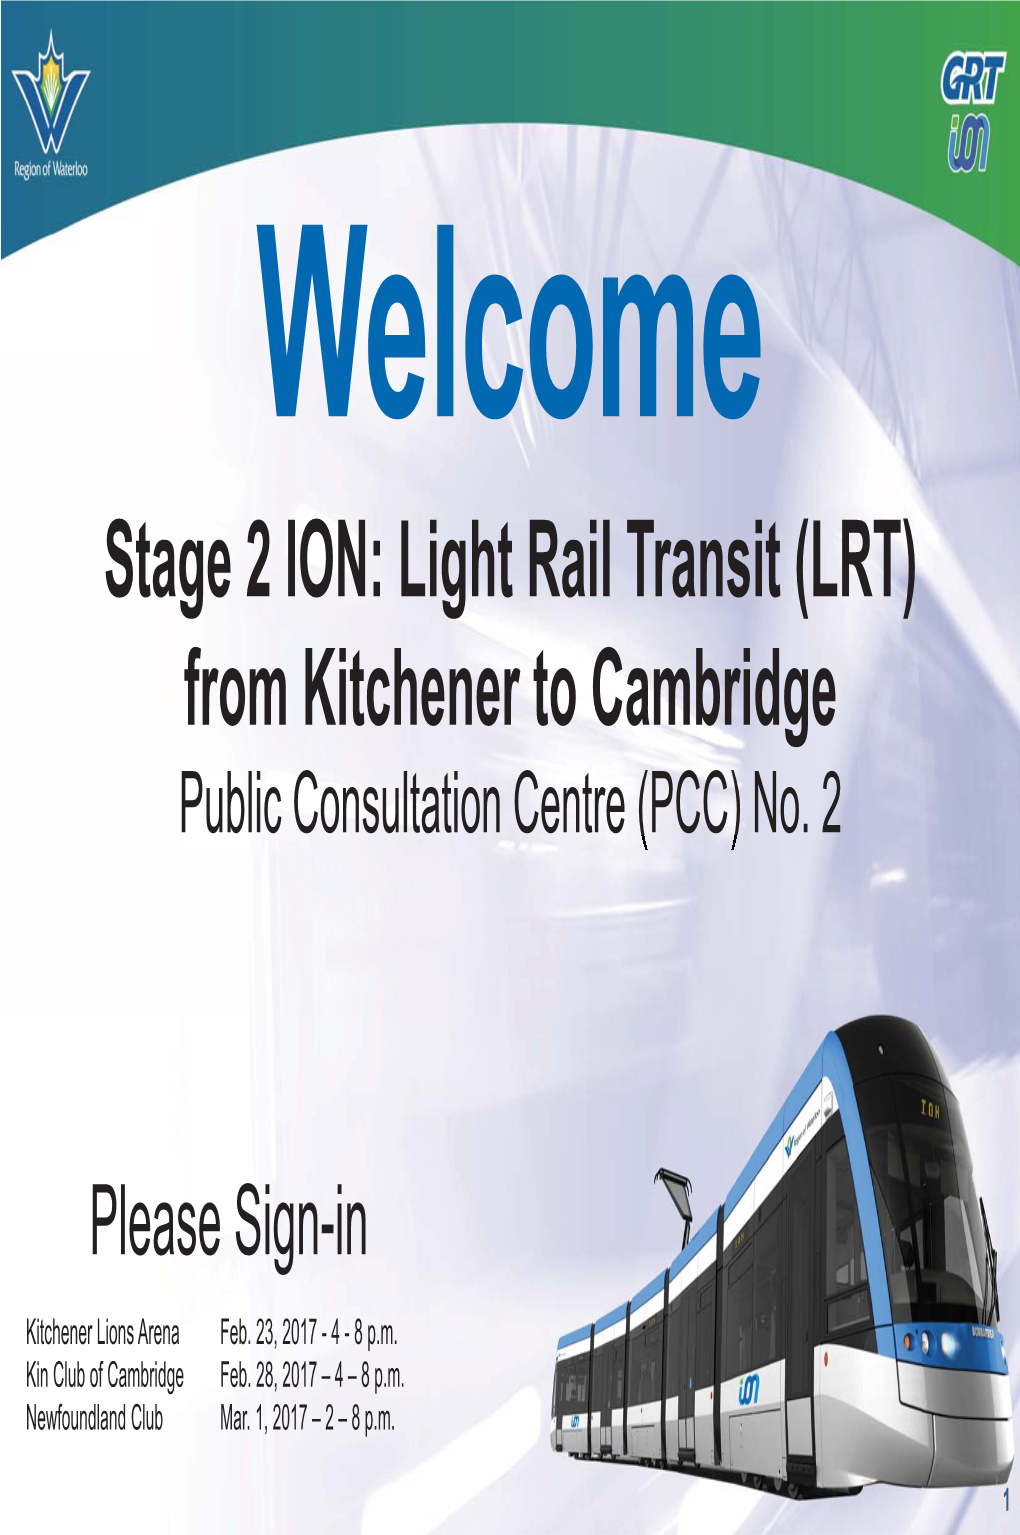 Stage 2 ION: Light Rail Transit (LRT) from Kitchener to Cambridge Public Consultation Centre (PCC) No